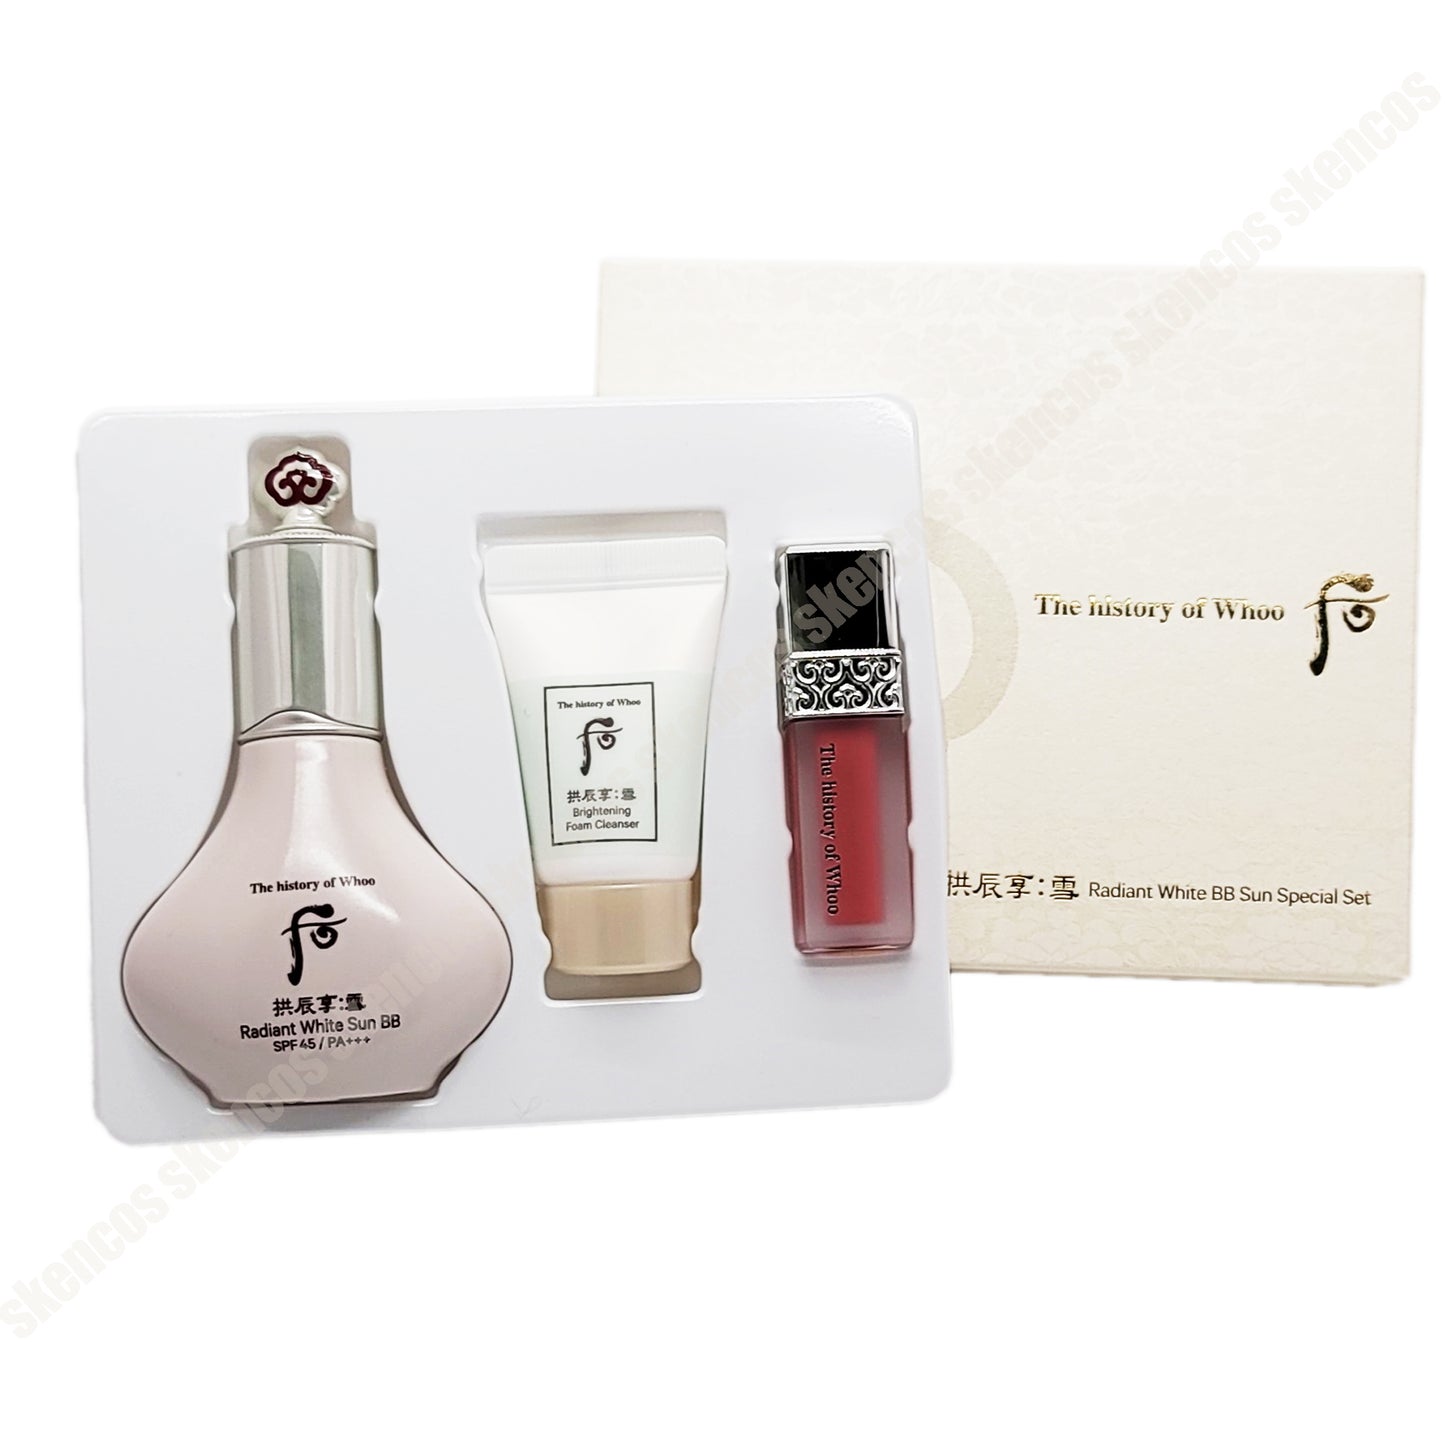 The History of Whoo Gongjinhyang Radiant White BB/SPF 45 40ml/UV Special Set